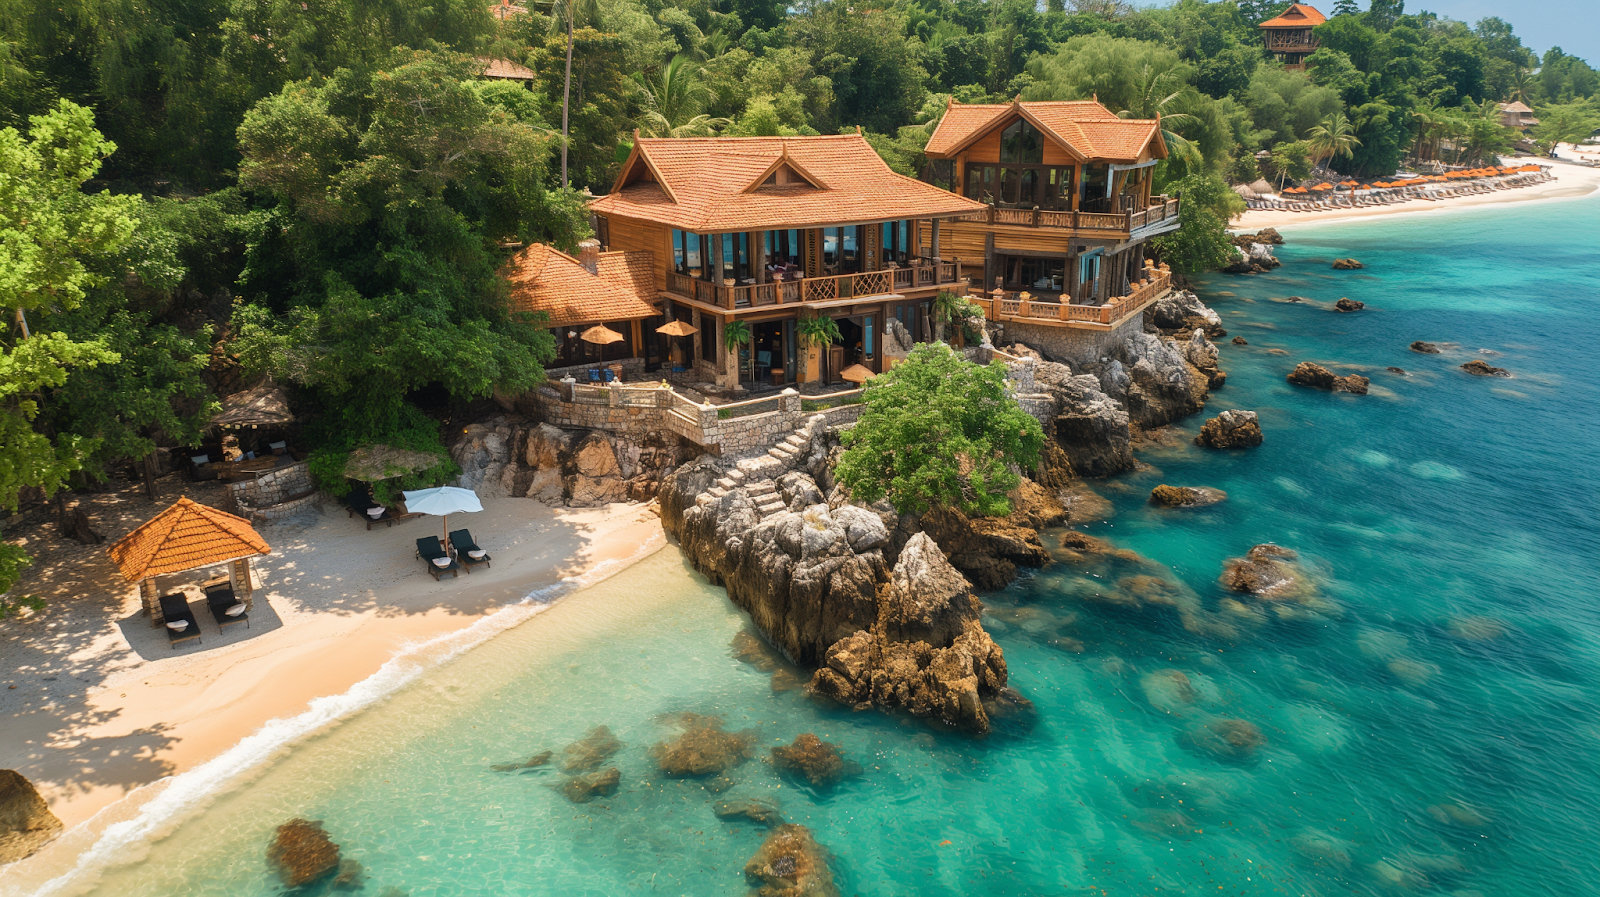 One of the many secluded beachfront properties you can experience